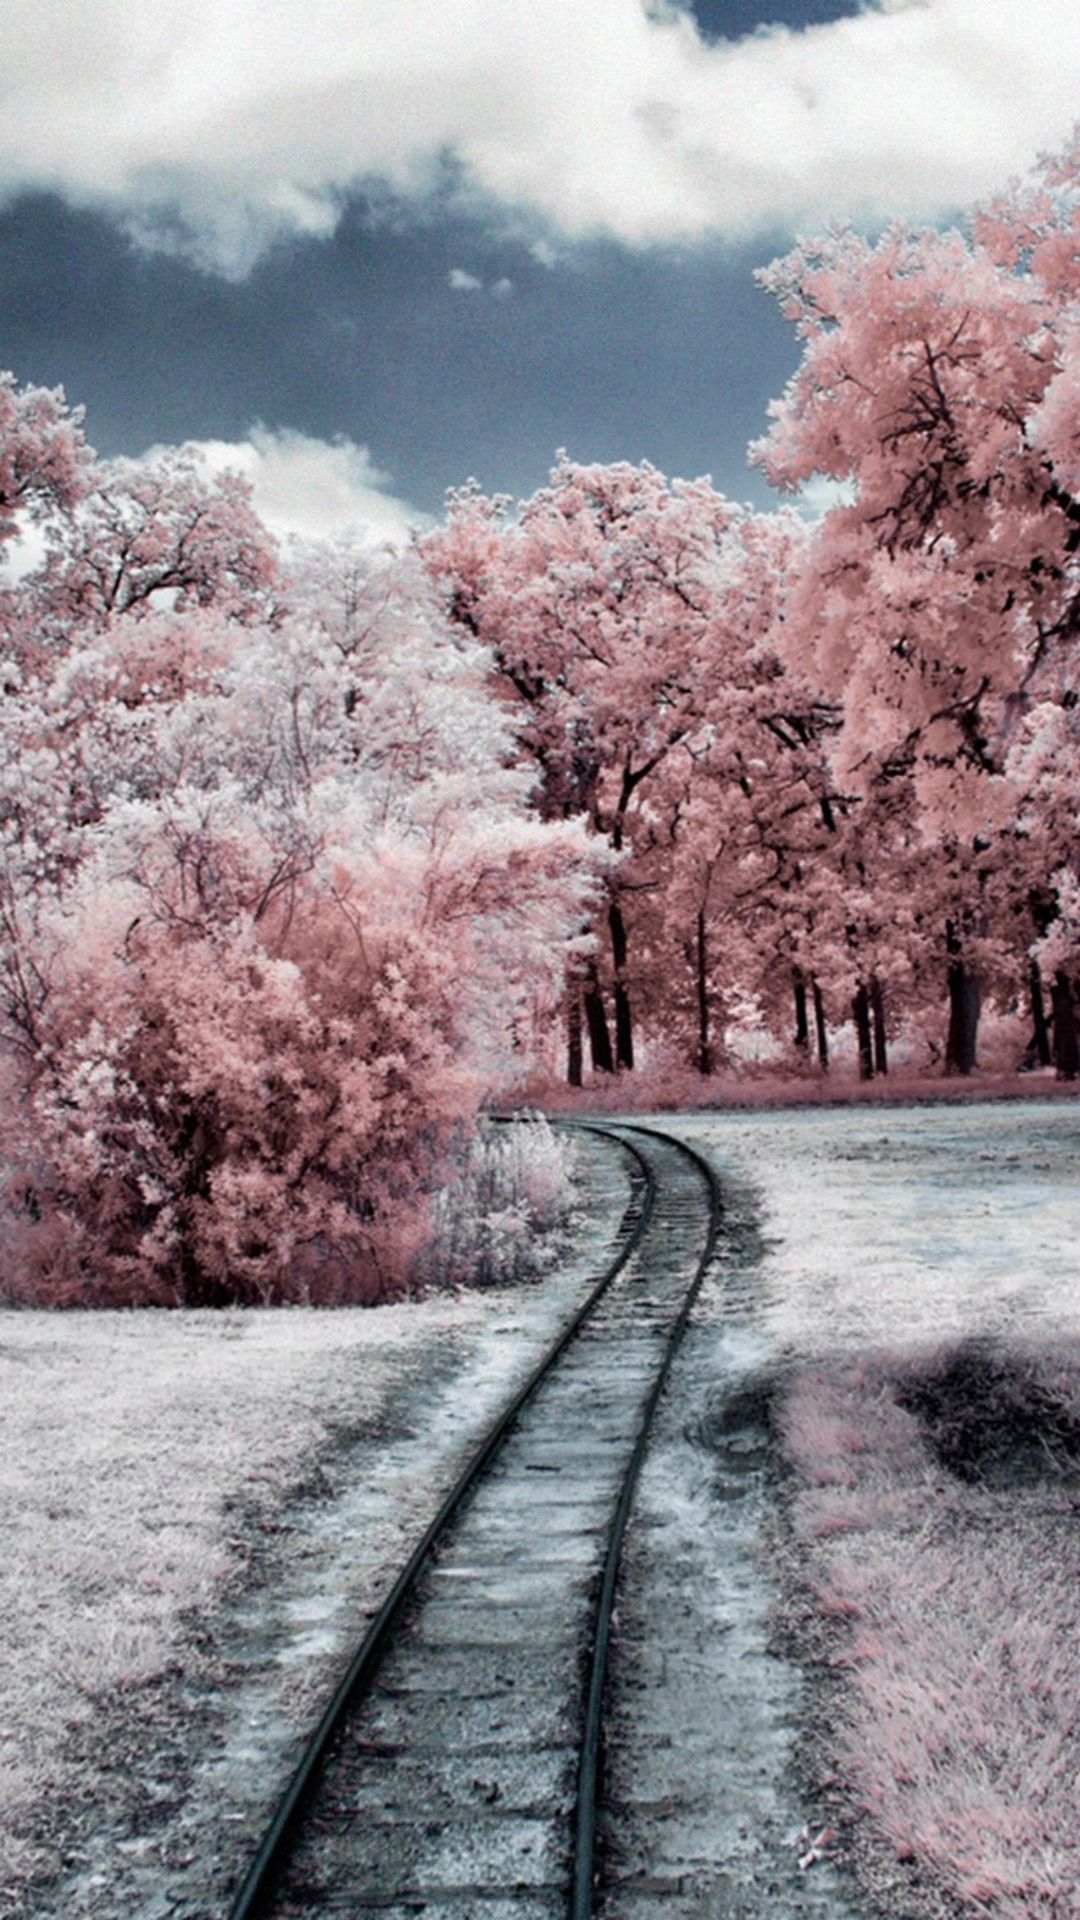 Nature Winter Through Pink Woods IPhone 6 Wallpaper Download. IPhone Wallpaper, IPad Wallpaper One St. IPhone Wallpaper Winter, Winter Wallpaper, Winter Iphone